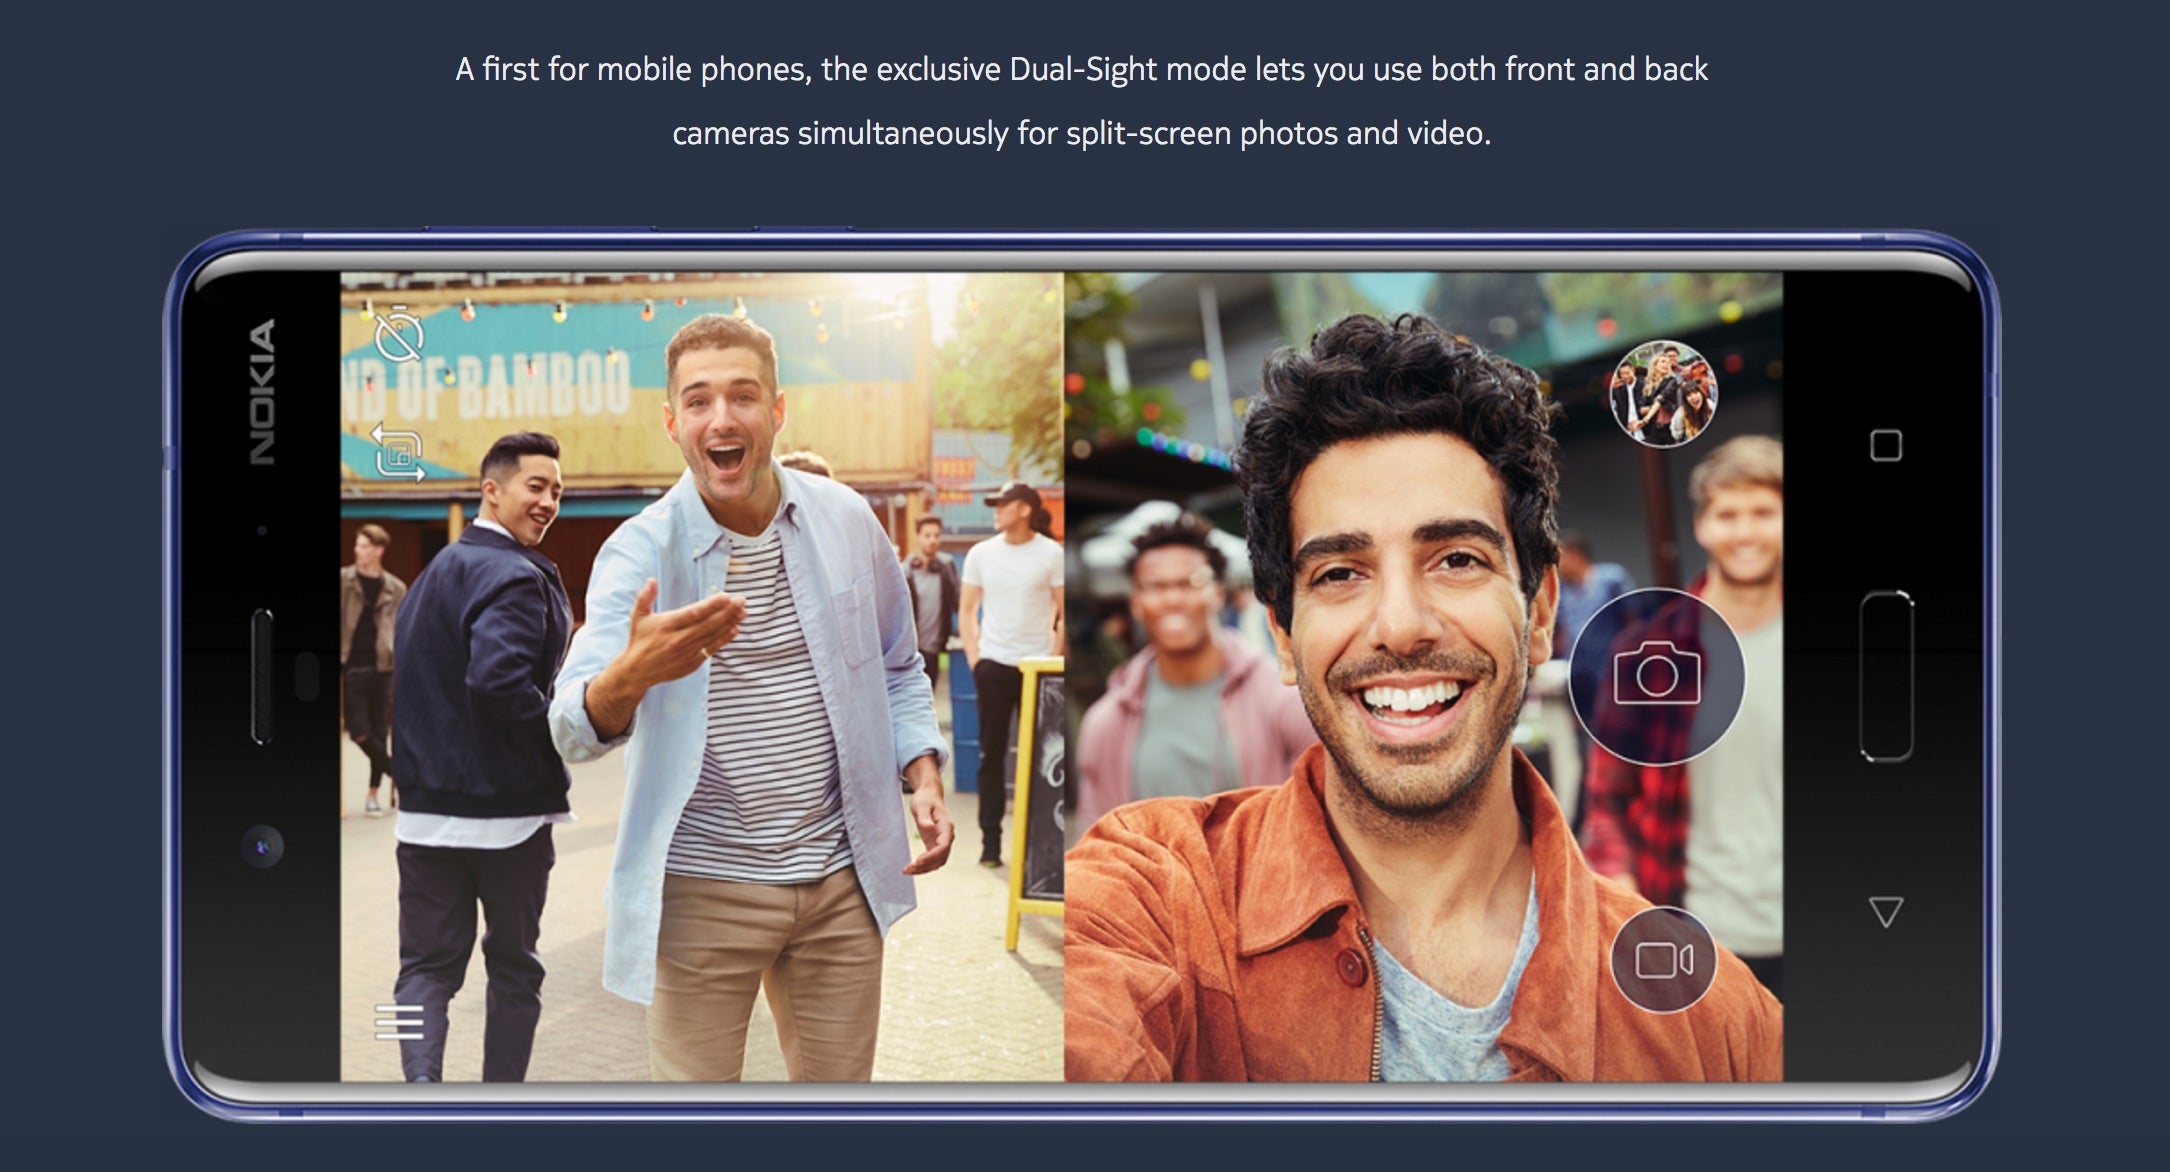 Nokia 8 cameras explained: how does the dual camera work and what is a "#Bothie"